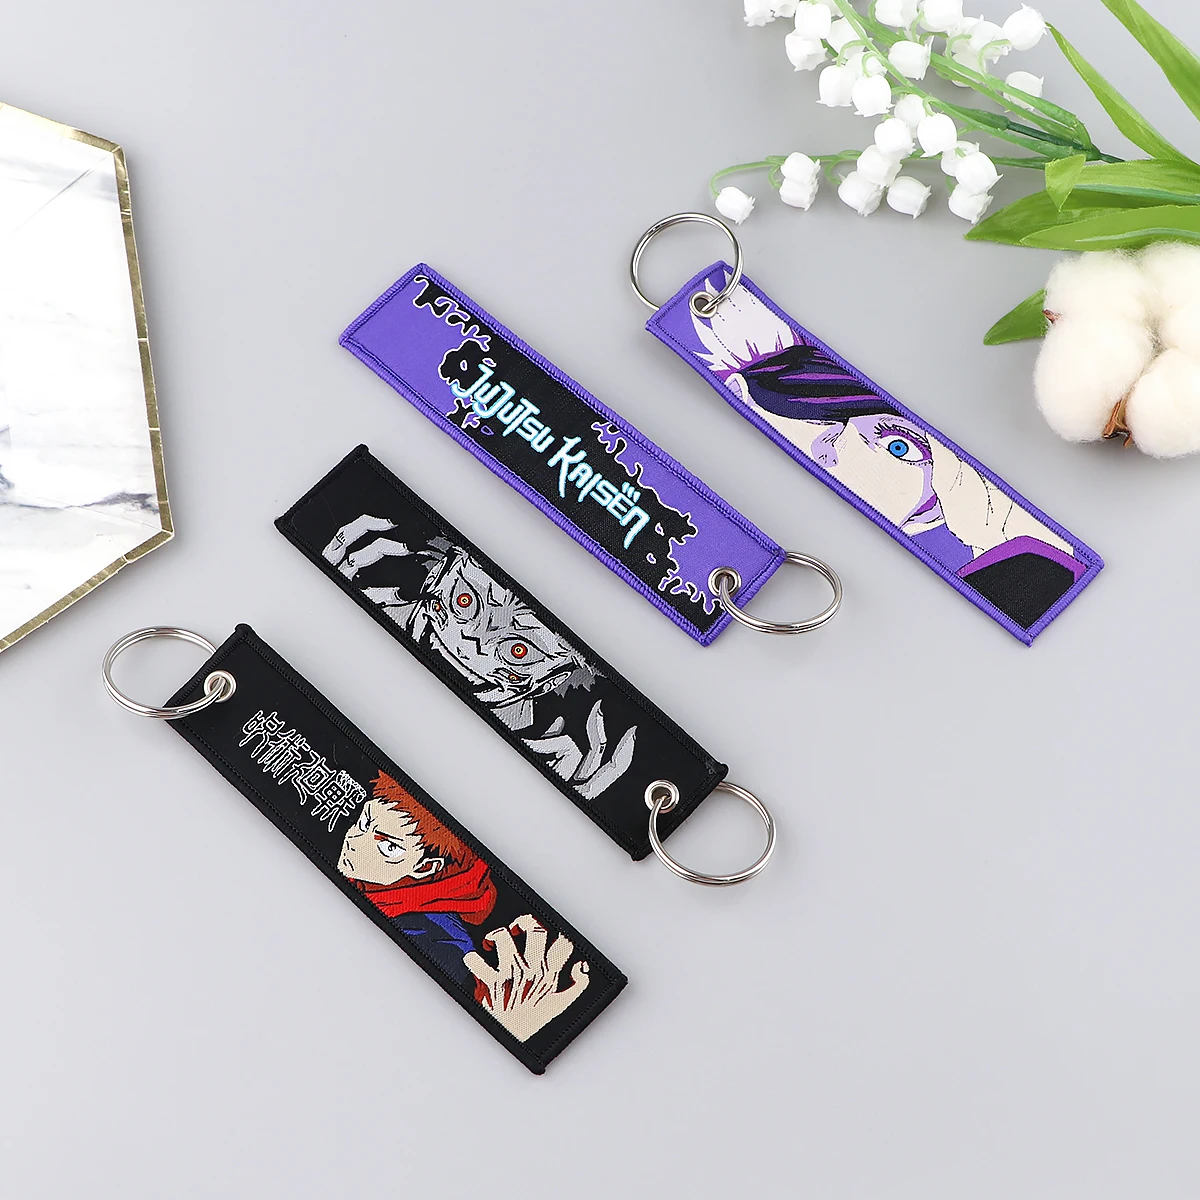 DB1051 Anime Jujutsu Kaisen Key Tag Keychain For Motorcycles The Key To Lucky Key Fobs Key Ring Chaveiro Brand Tag Kids Gifts